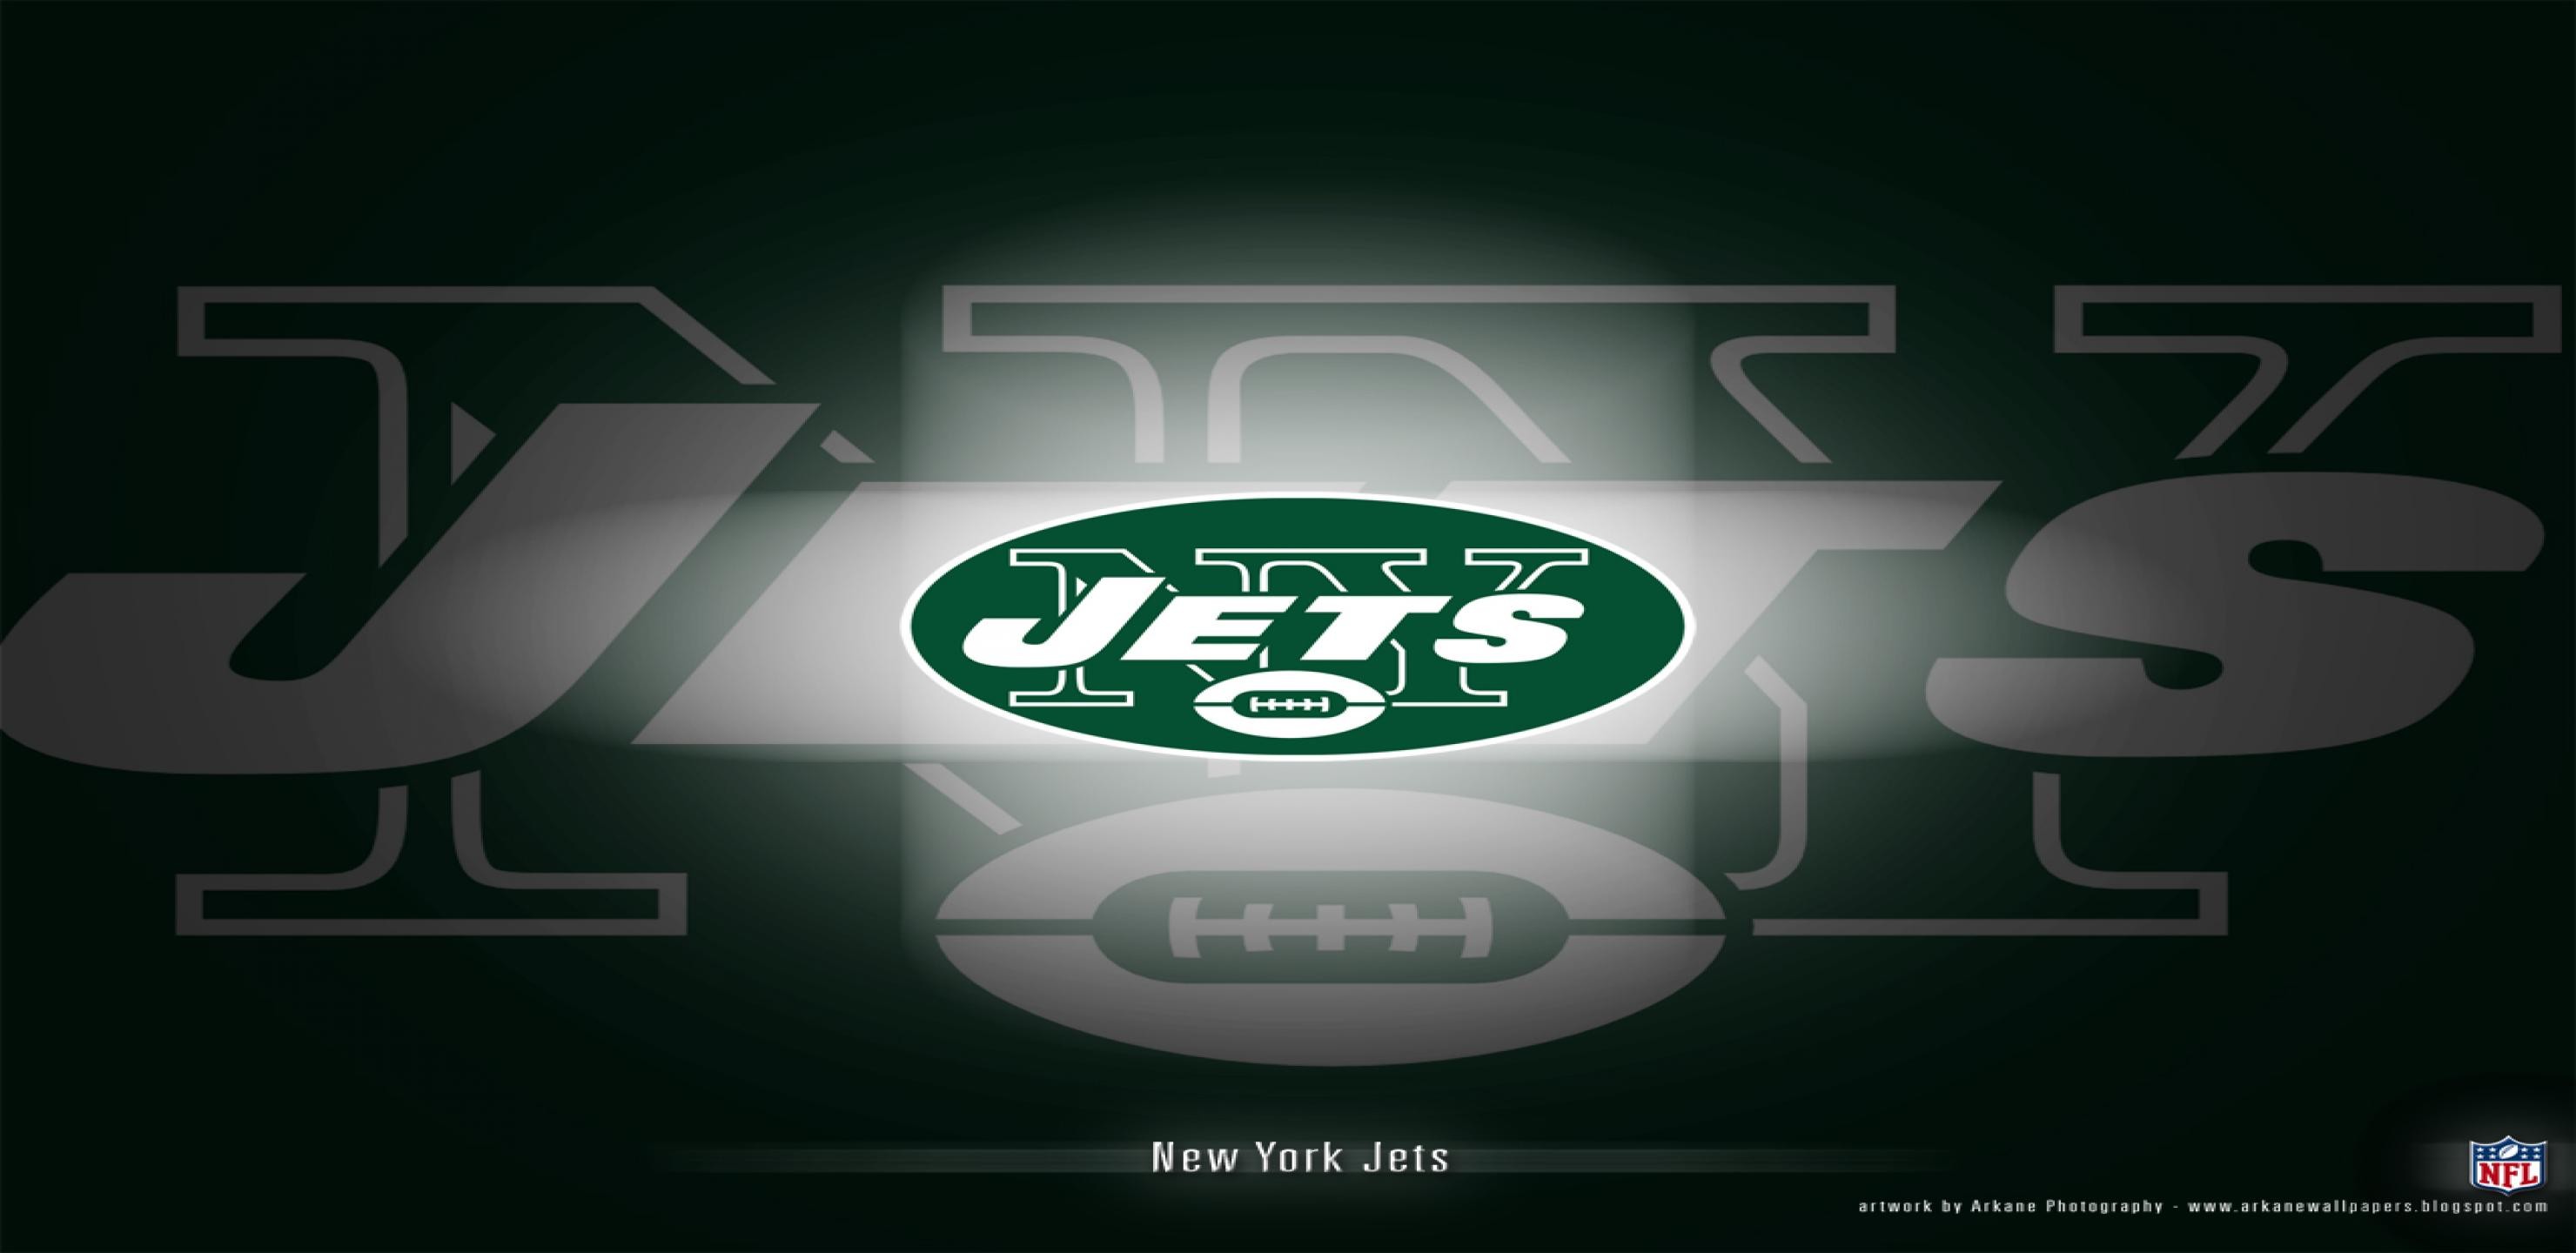 2960x1440 ... New York Jets Mobile Wallpaper The Halloween and Makeup